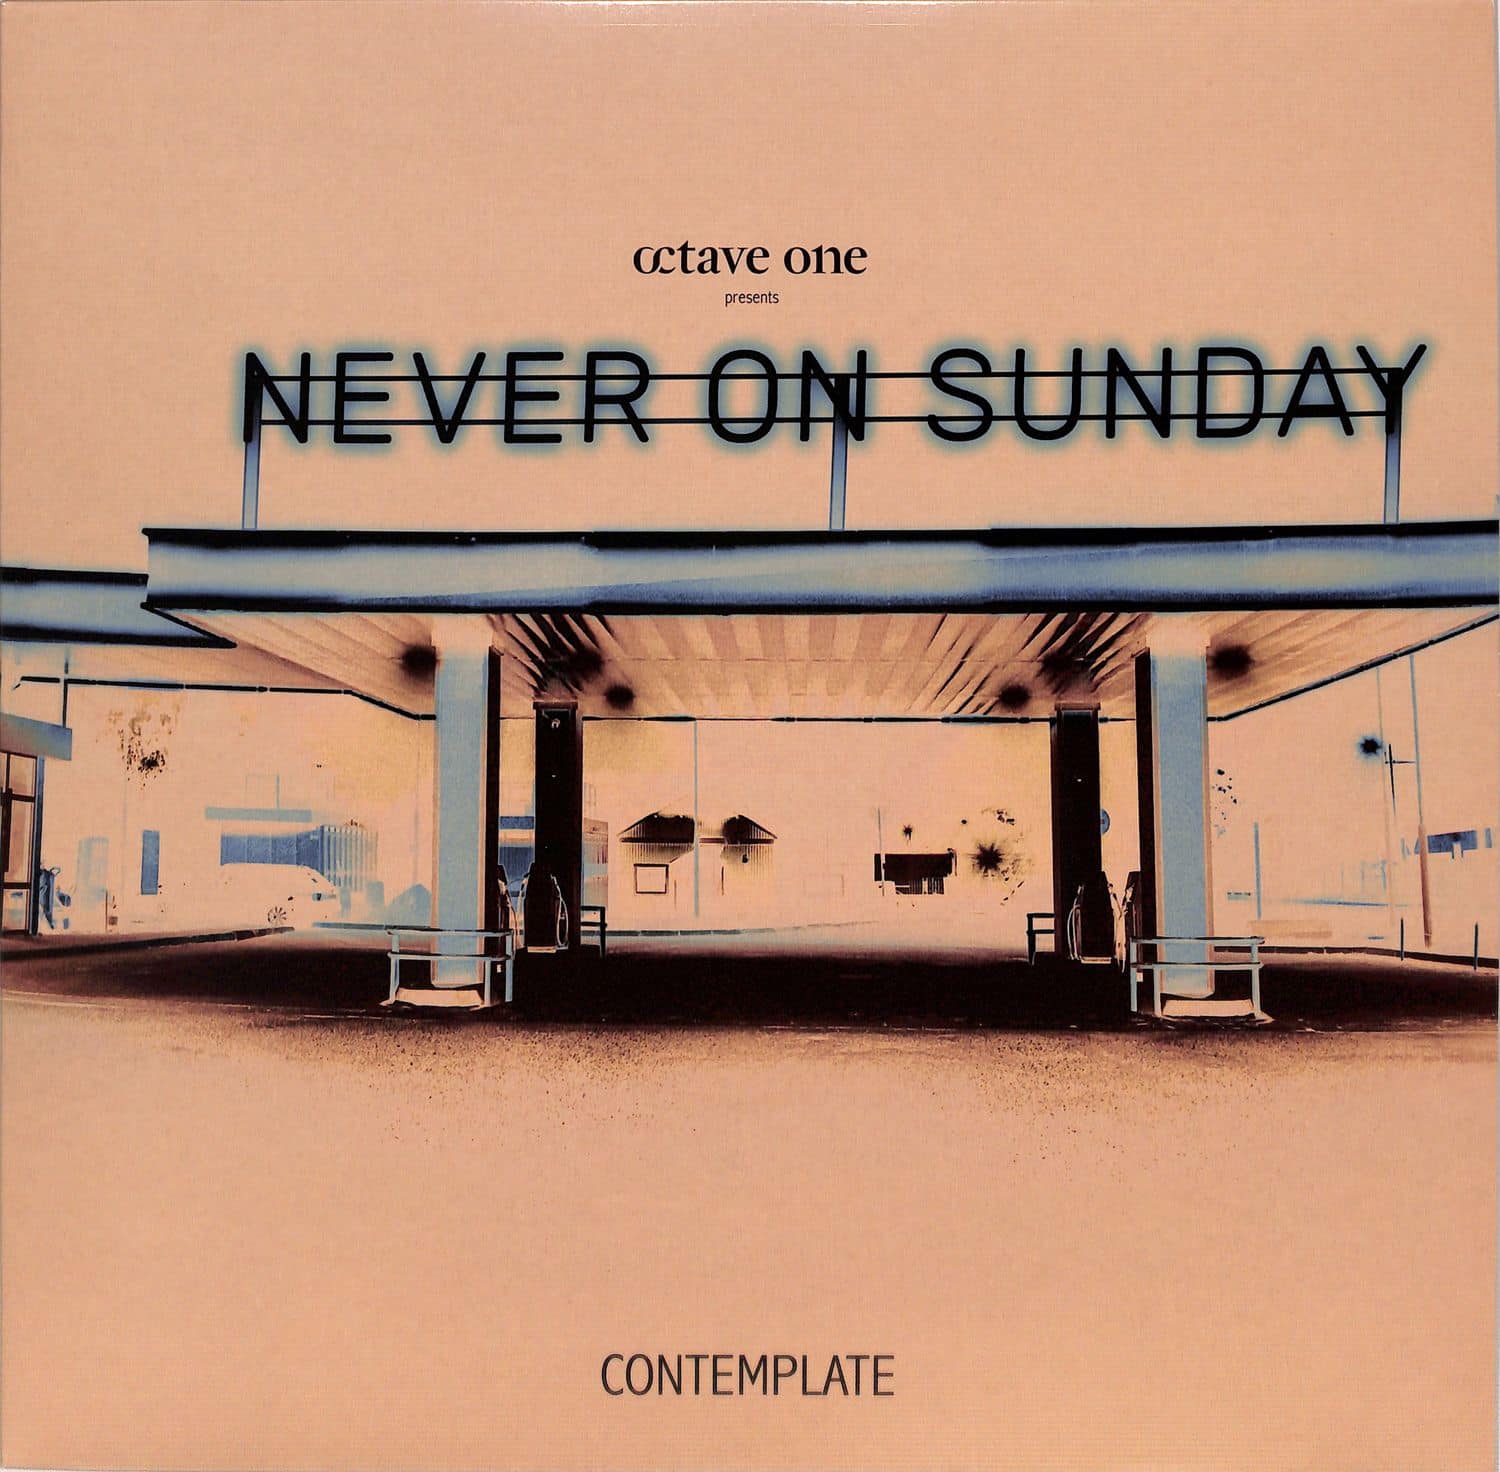 Octave One presents Never On Sunday - CONTEMPLATE